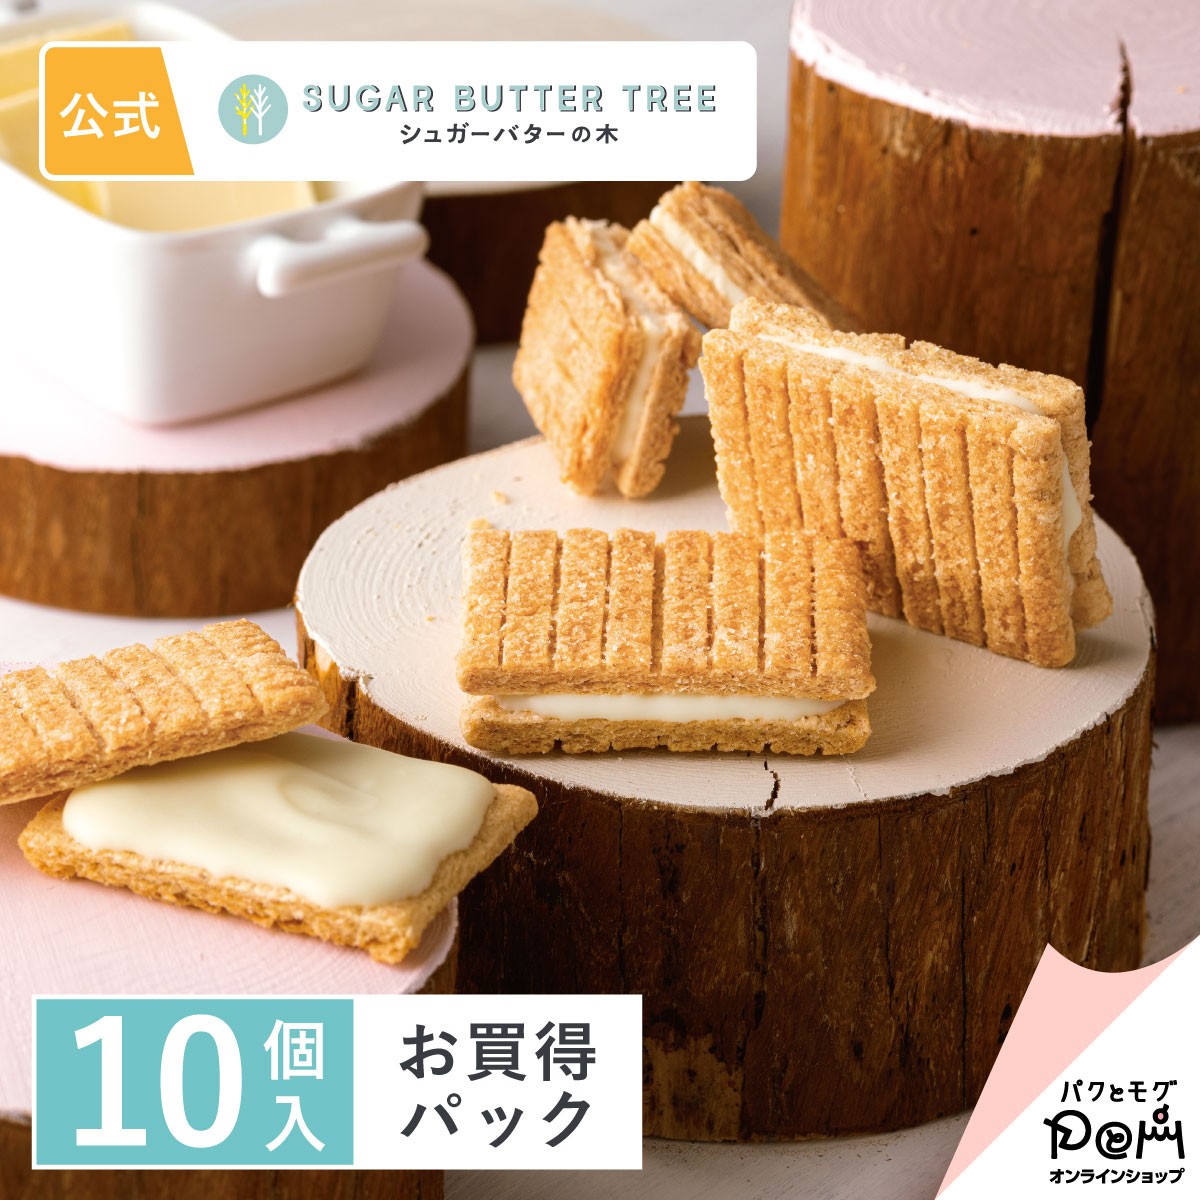 shuga- butter sandwich. tree . bargain pack 10 piece insertion shuga- butter. tree your order bite sweets popular . earth production standard earth production confection gift pretty 